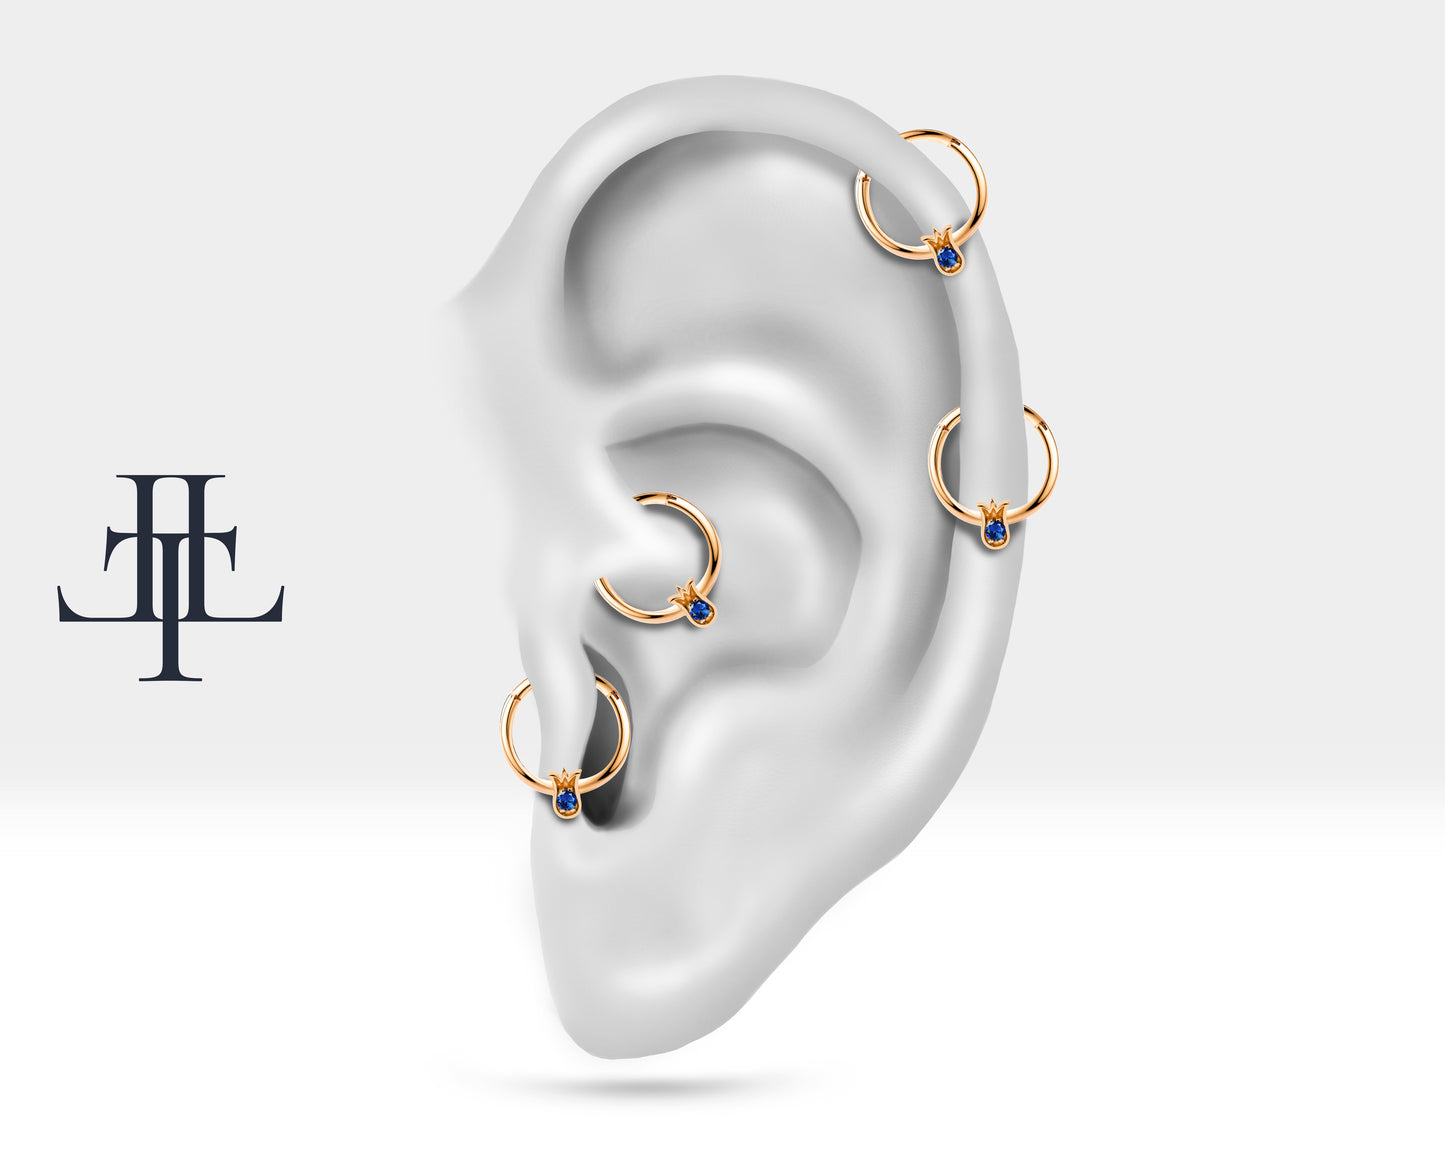 Cartilage Hoop,Round Cut Sapphire Tulip Design Clicker,Single Earring,14K Solid Gold,16G(1.2mm)